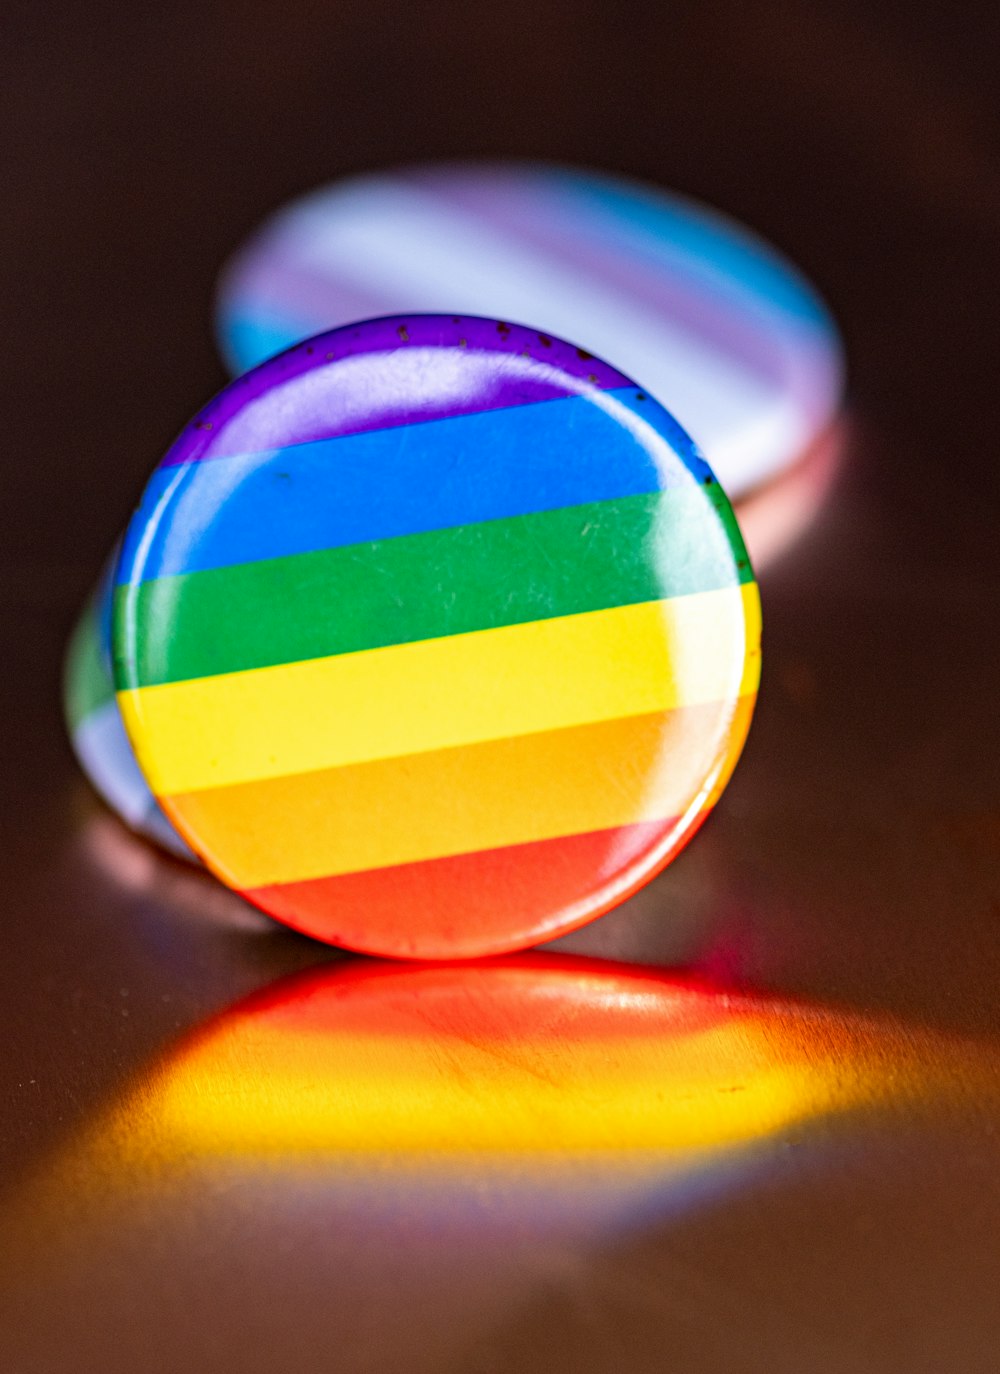 a rainbow colored button sitting on top of a table